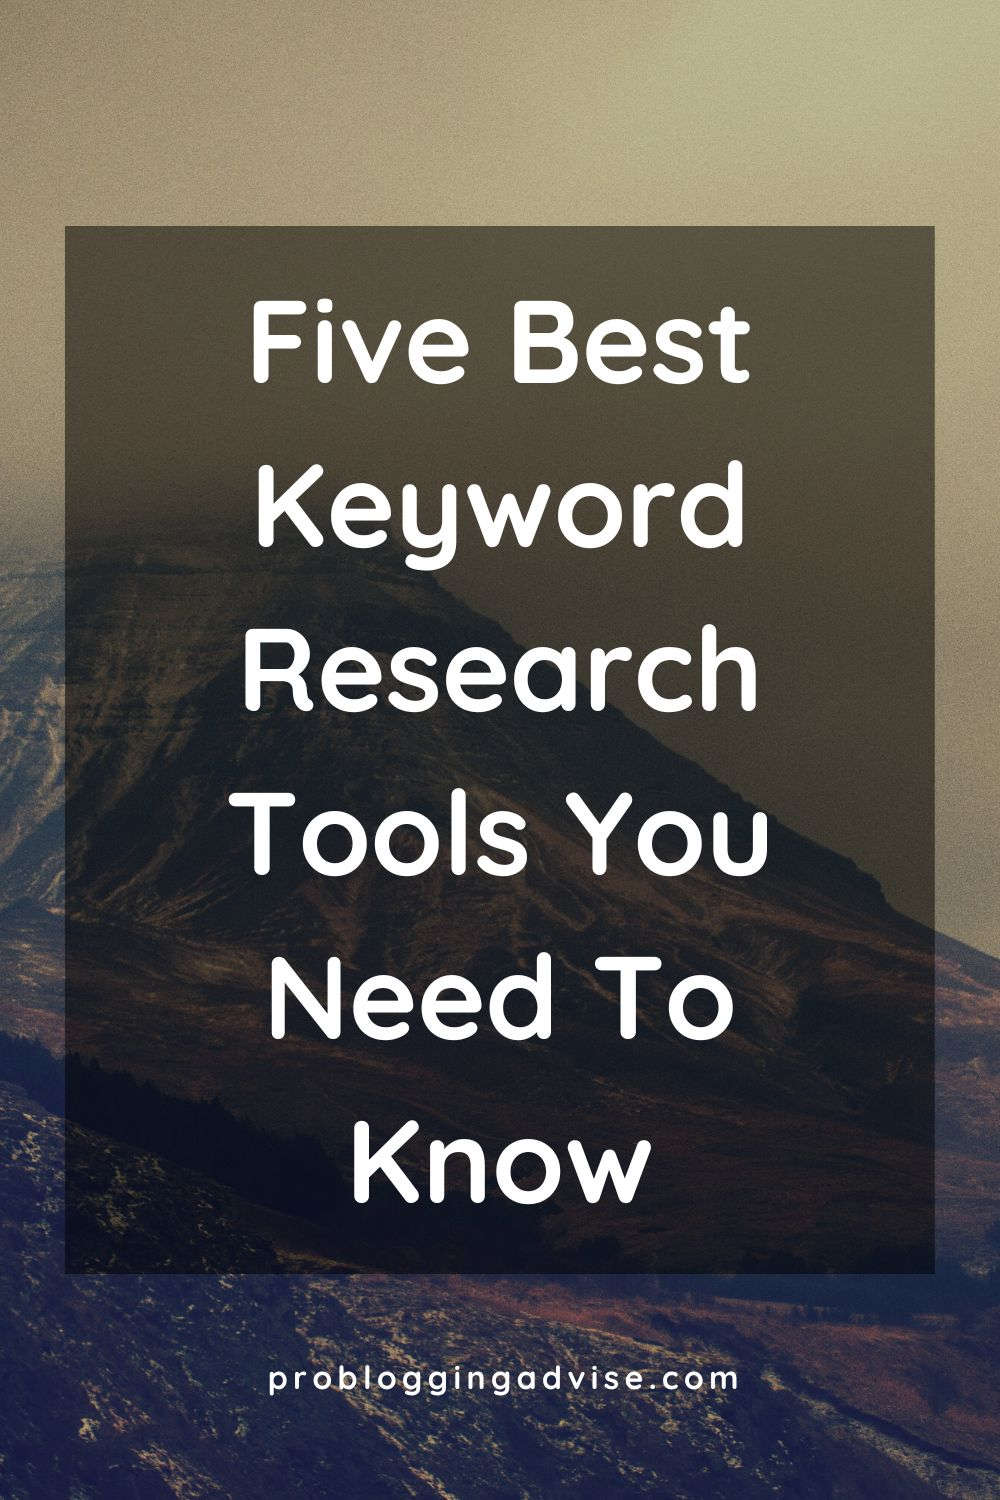 5 Best Keyword Research Tools You Need To Know